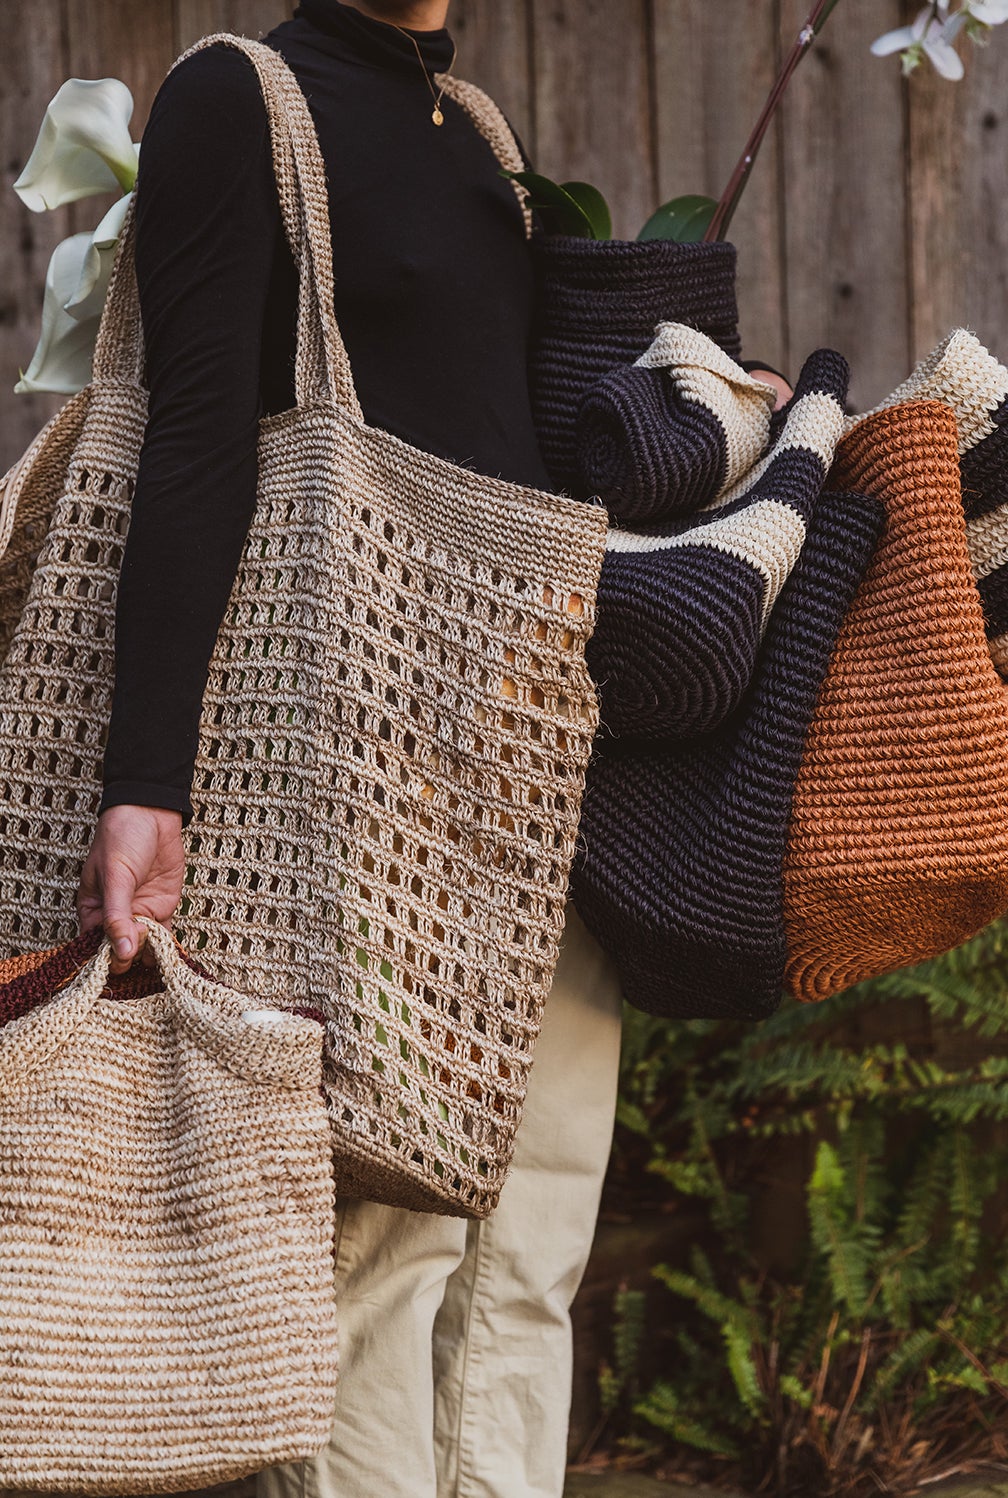 Woman holding woven baskets and bags